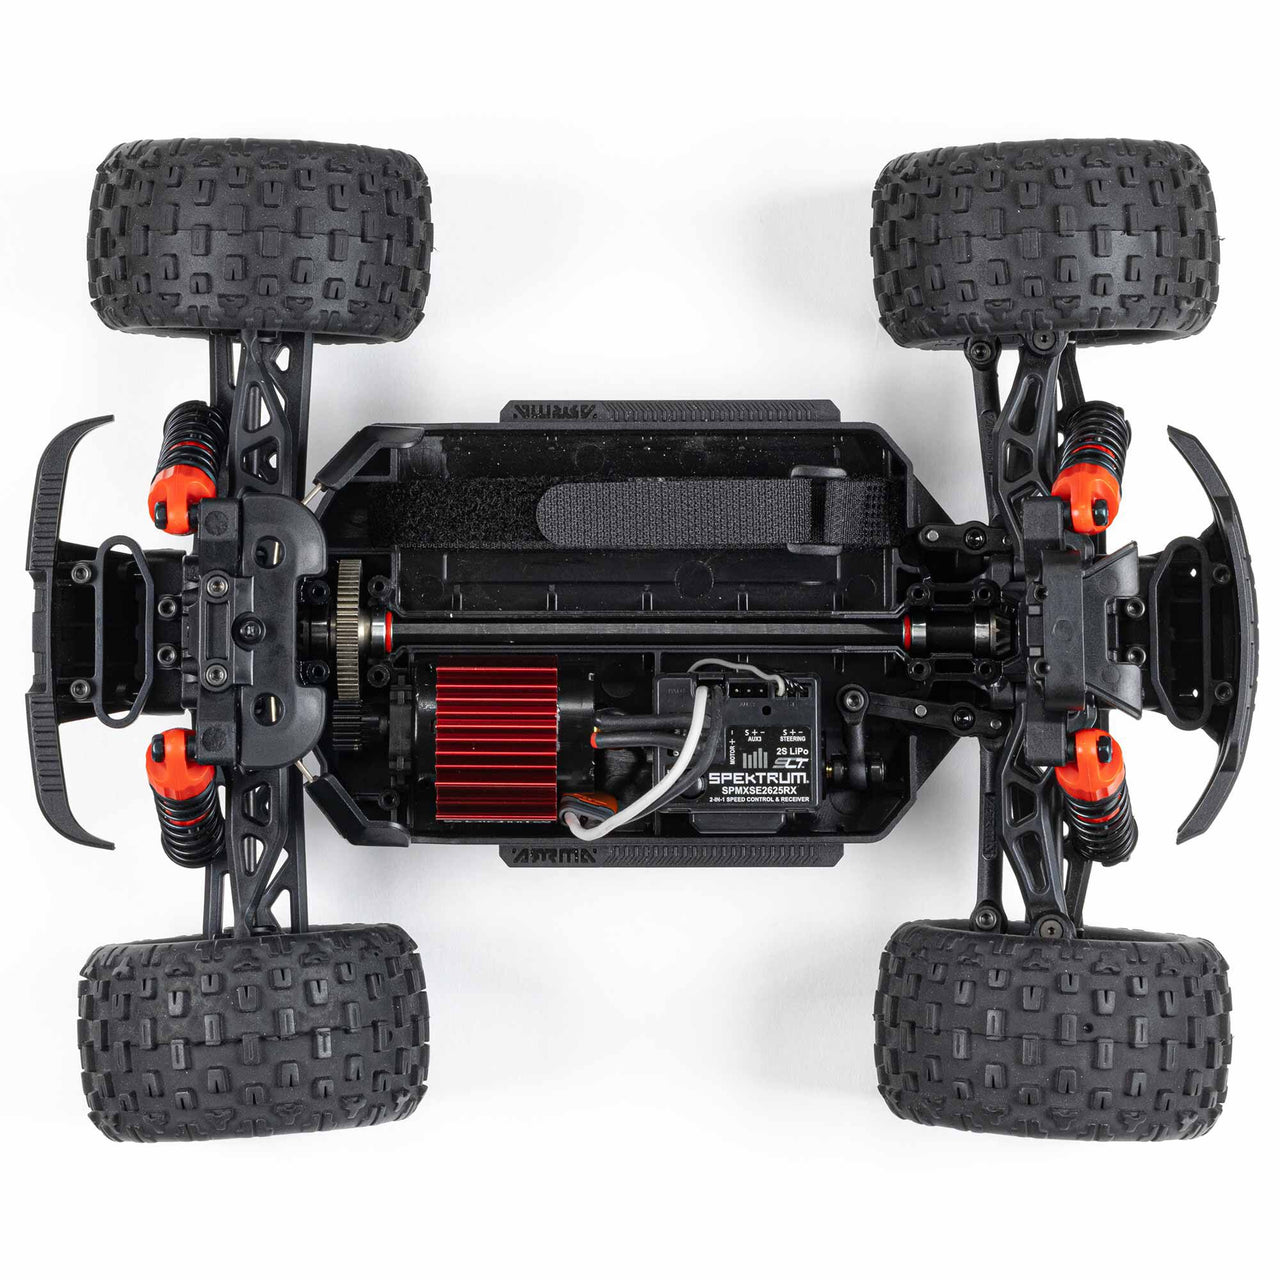 ARA2102T3 1/18 GRANITE GROM MEGA 380 Brushed 4X4 Monster Truck RTR with Battery & Charger, Green